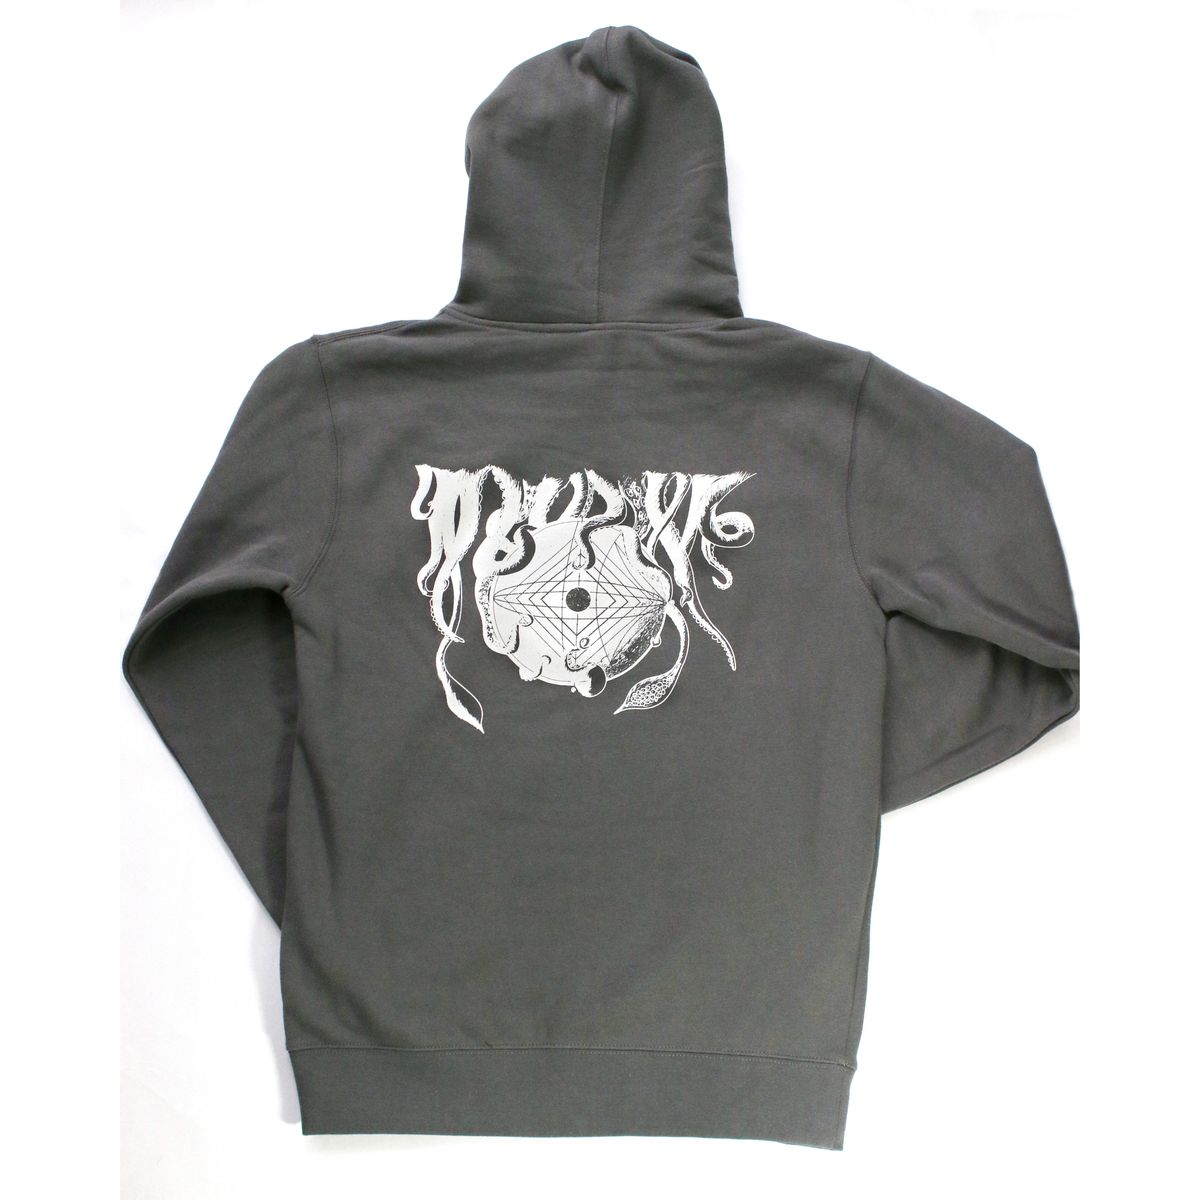 Back of a gray hoodie featuring a white abstract design